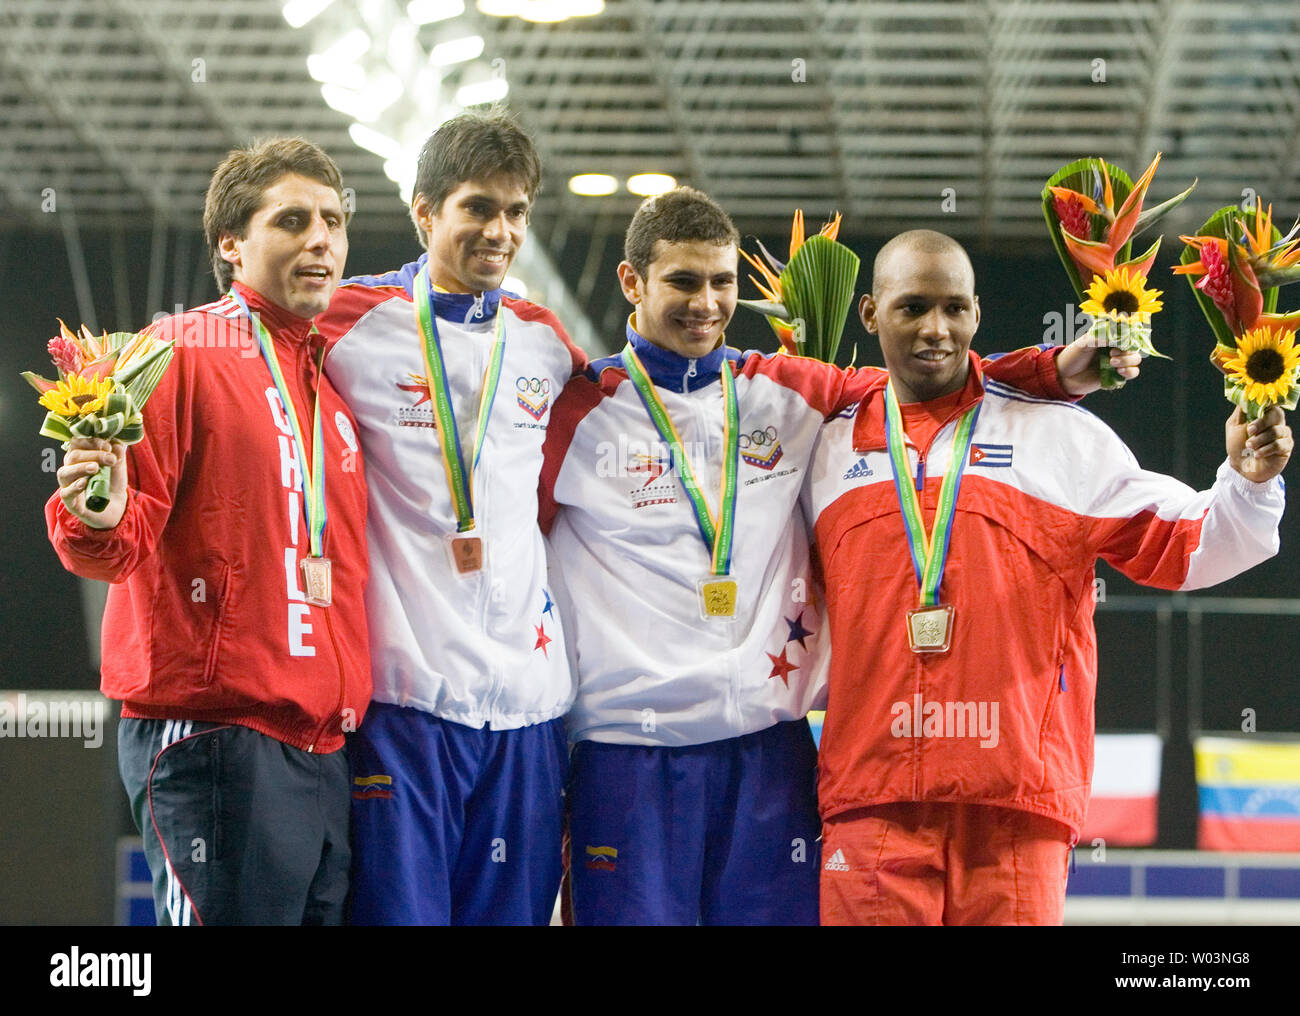 L. to R. on the podium, Chile's Paris Inostroza and Venezuela's Silvio Fernandez tied for bronze, Venezuela's Reuben Limardo with gold and Cuba's Andres Carrillo with silver in the  men's individual epee celebrate at Riocentro during the 2007 Pan Am Games in Rio de Janeiro, Brazil on July 16, 2007.   (UPI Photo/Heinz Ruckemann) Stock Photo